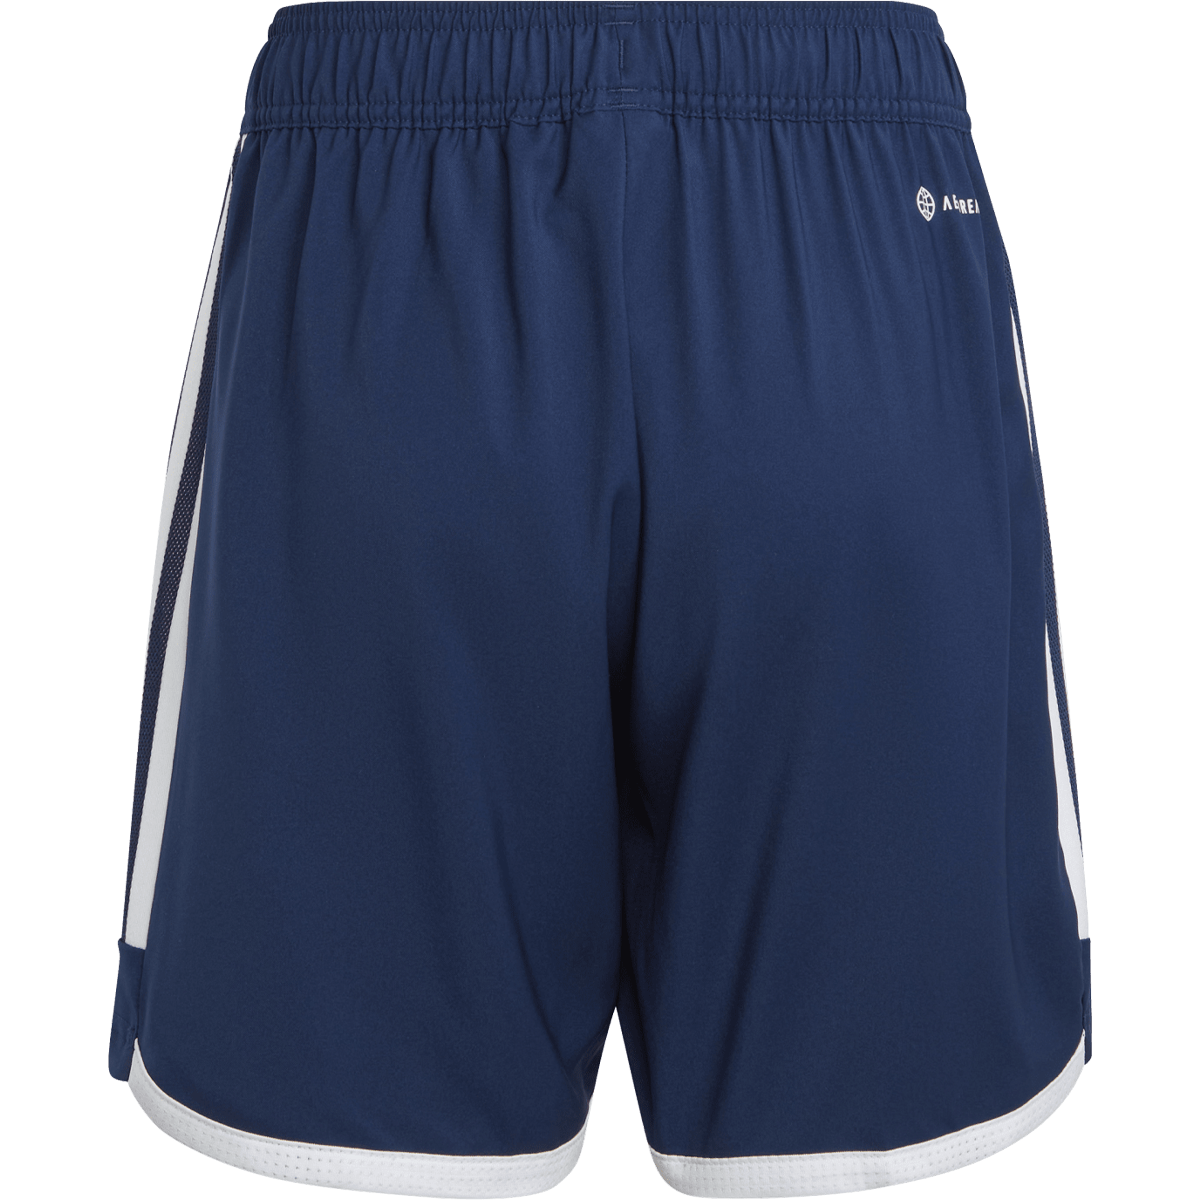 Youth Tiro 23 Competition Match Short alternate view